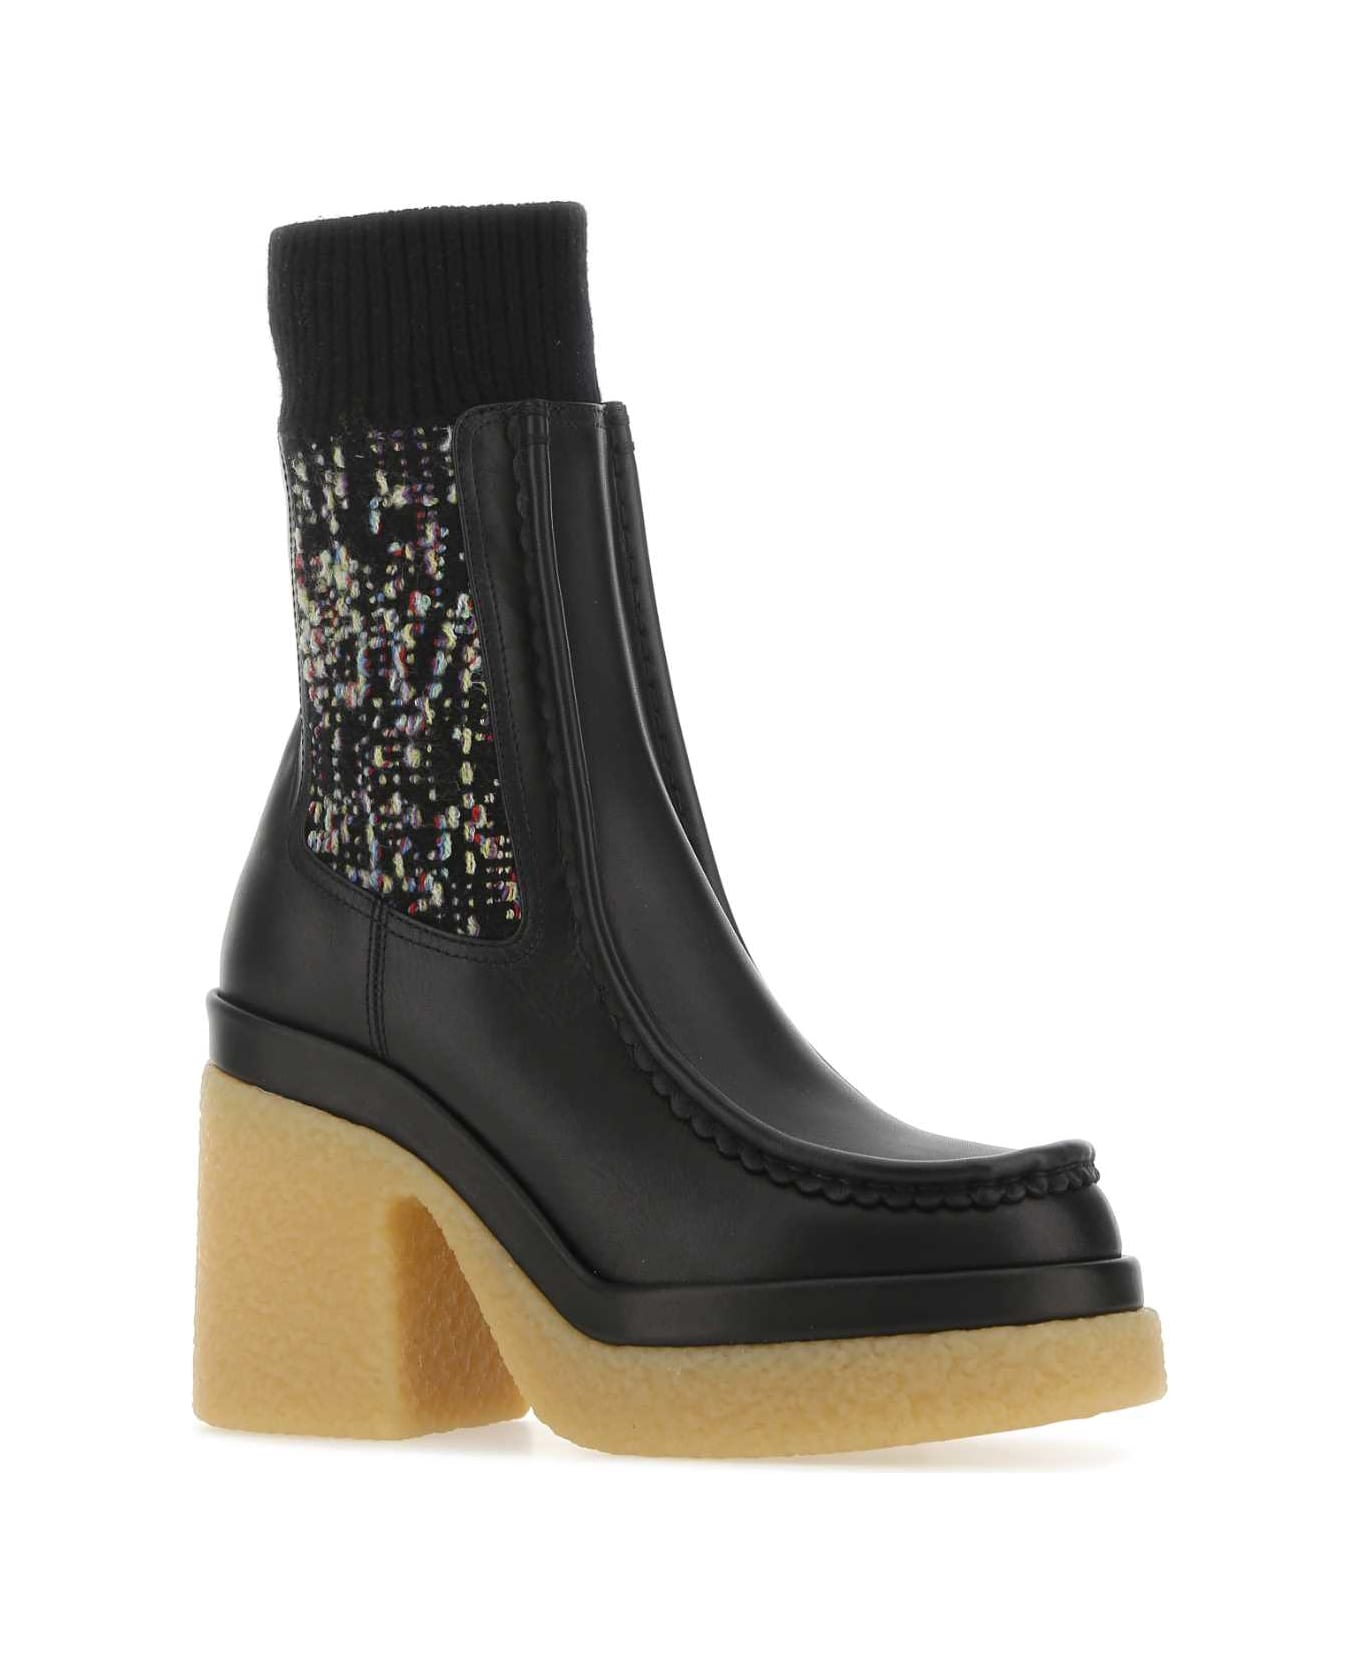 Chloé Black Leather Jamie Ankle Boots - 001 ブーツ